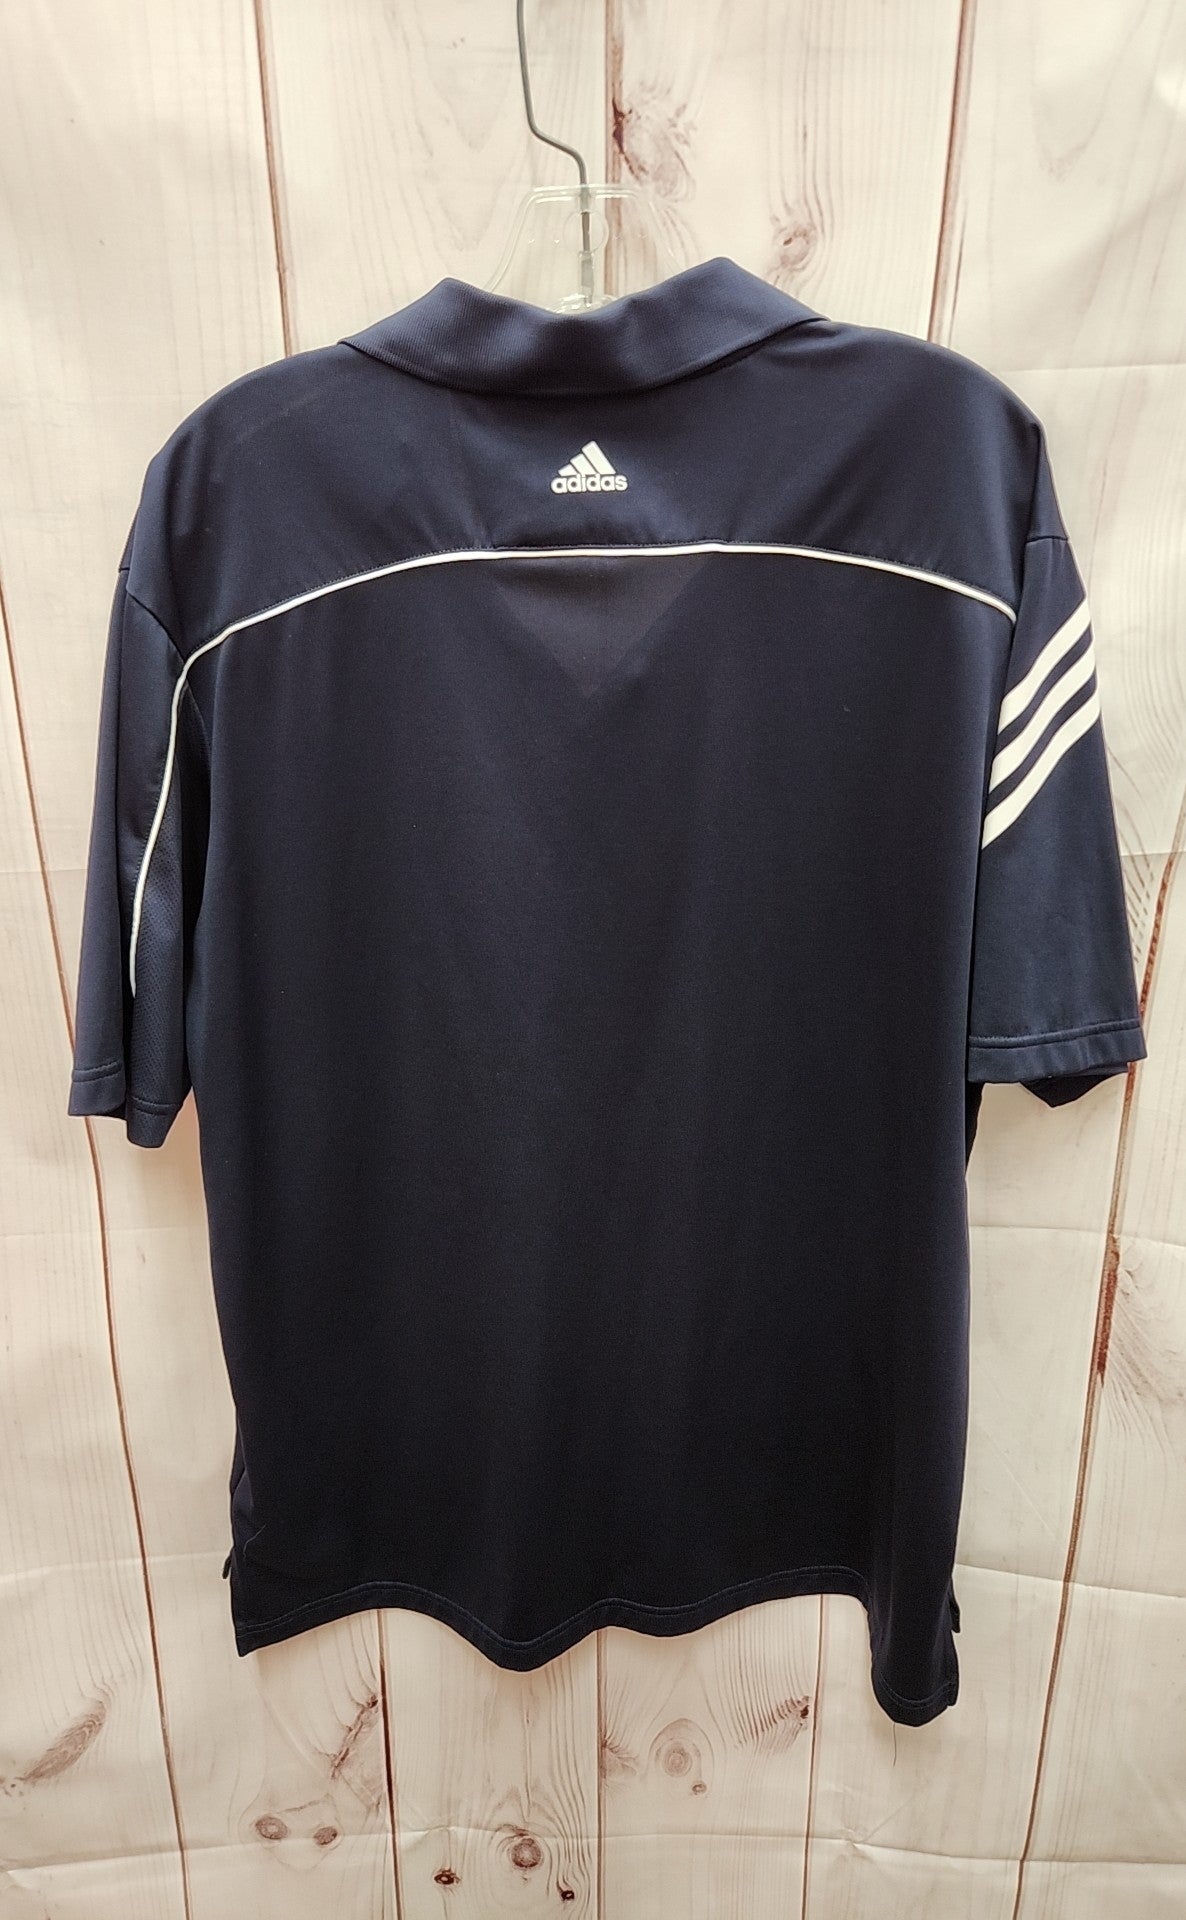 Adidas Men's Size L Navy Shirt Climacool polo